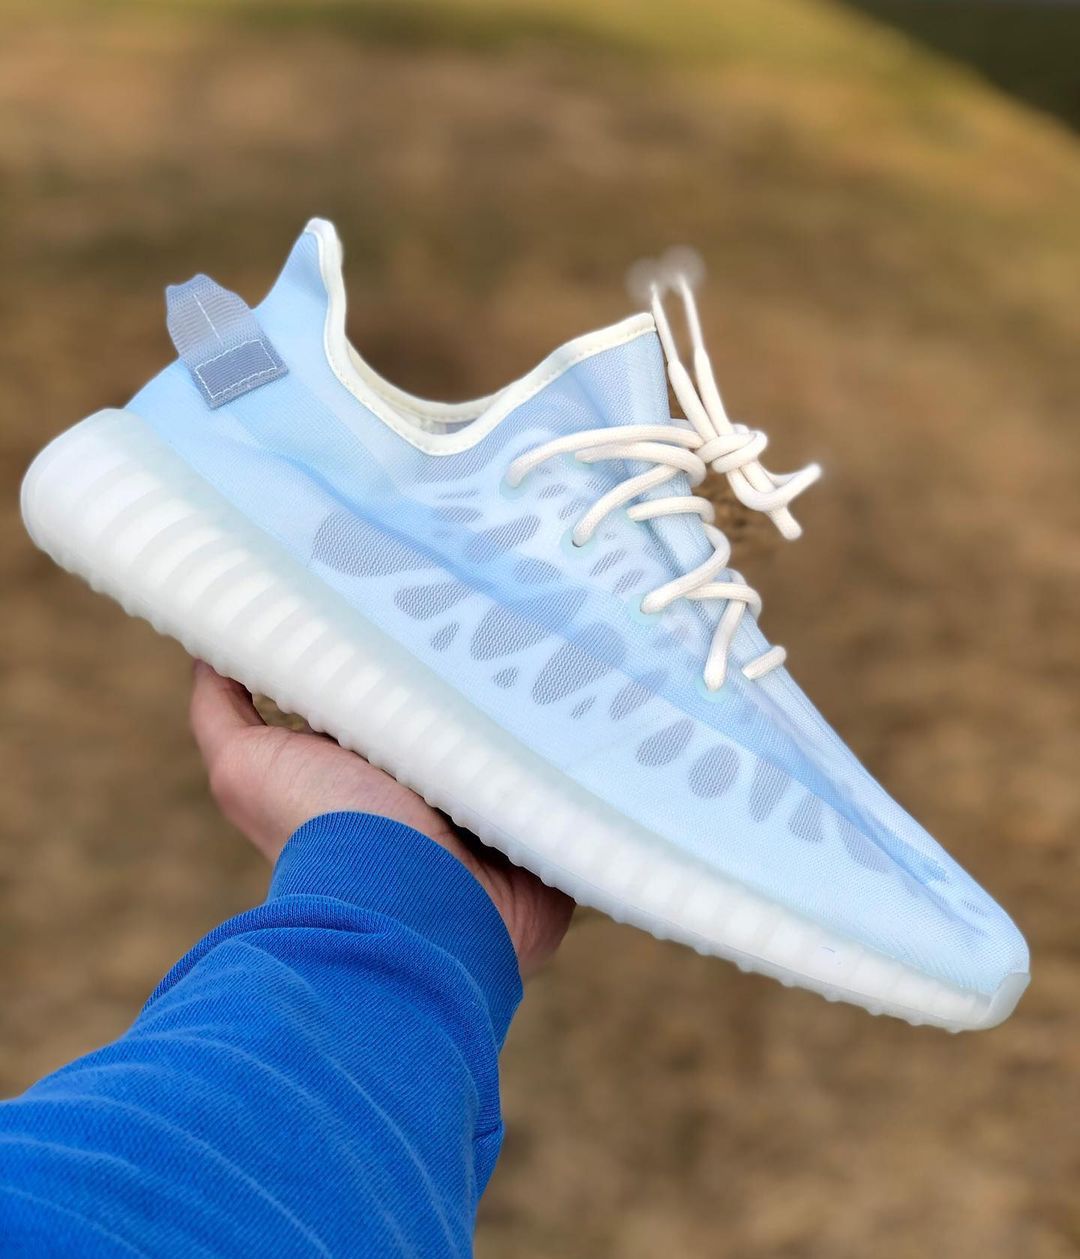 To adapt Deplete Highland JustFreshKicks on Twitter: "In Hand Look at the adidas Yeezy Boost 350 V2  "Mono Ice" https://t.co/zxhyTfGxvk https://t.co/UCEgp7QDIf" / Twitter